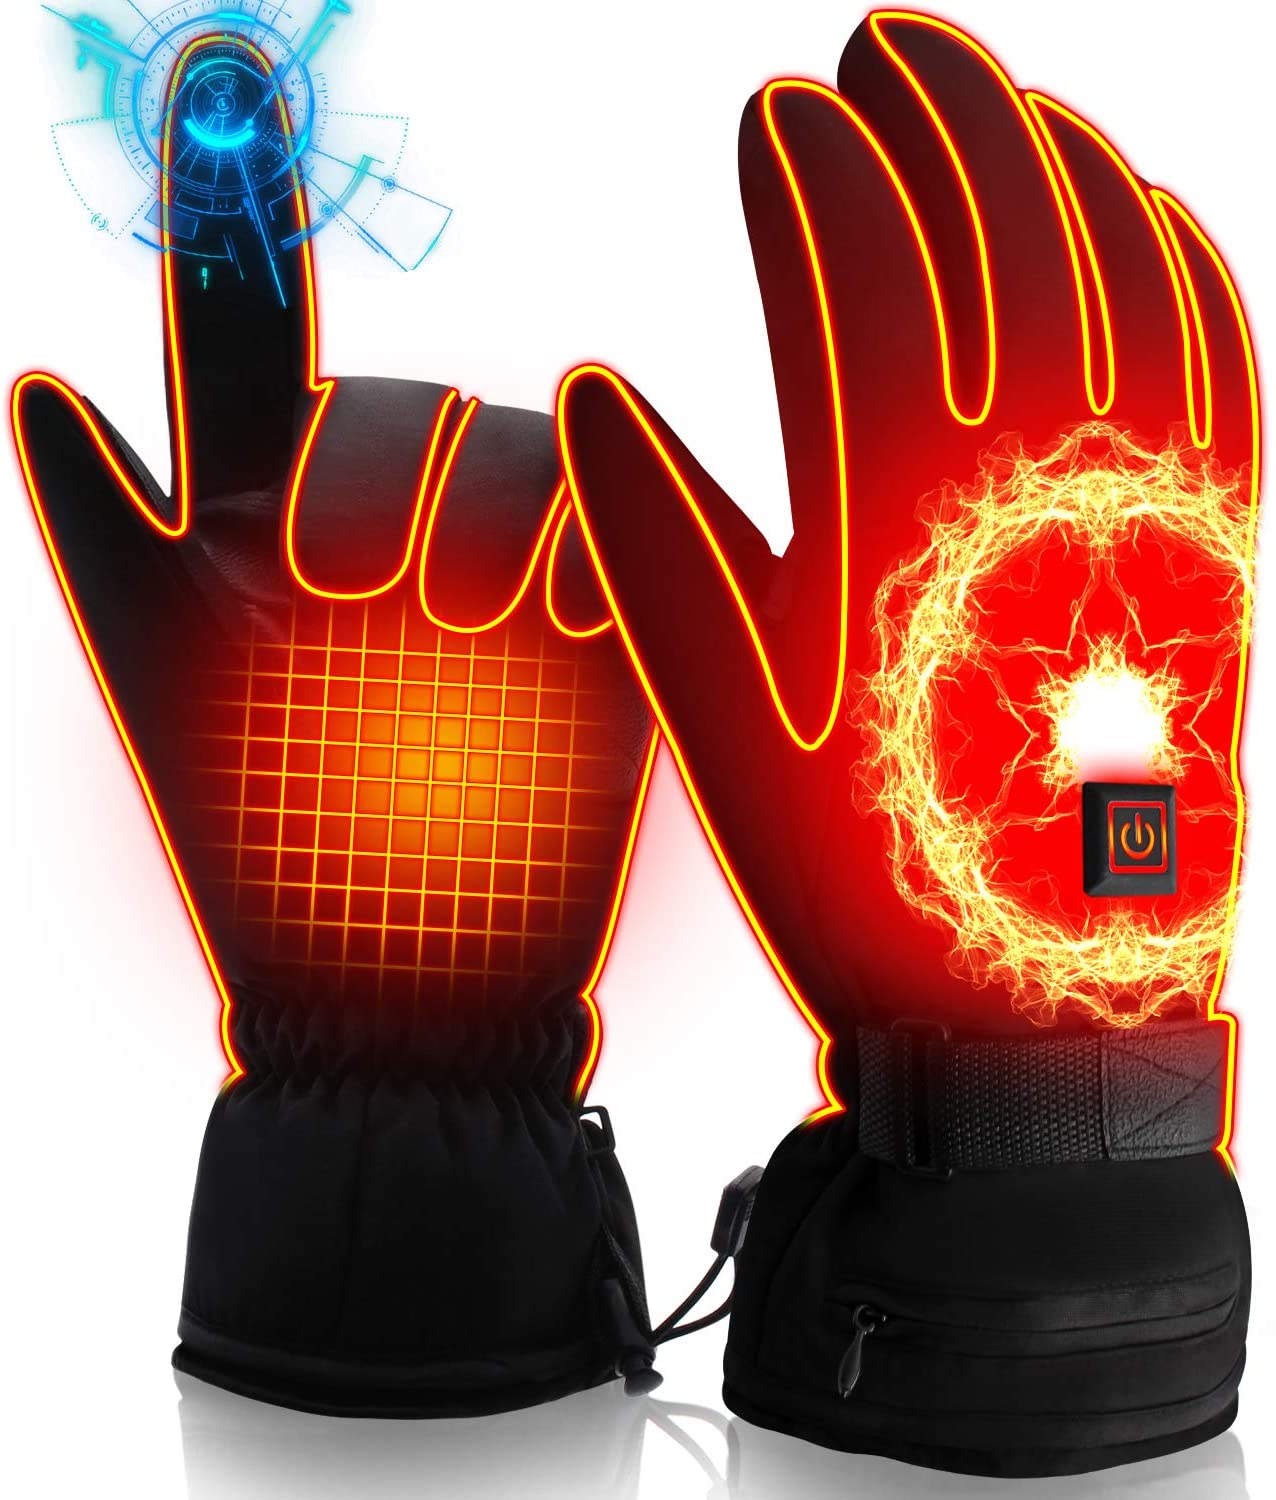 Rabbitroom Women Men Rechargeable Electric Heated Gloves Battery Powered Gloves,Waterproof Touchscreen Thermal Insulate Arthritic Hand Warmer Gloves for Skiing Motorcycling Hiking Climbing Wa - Home Decor Gifts and More